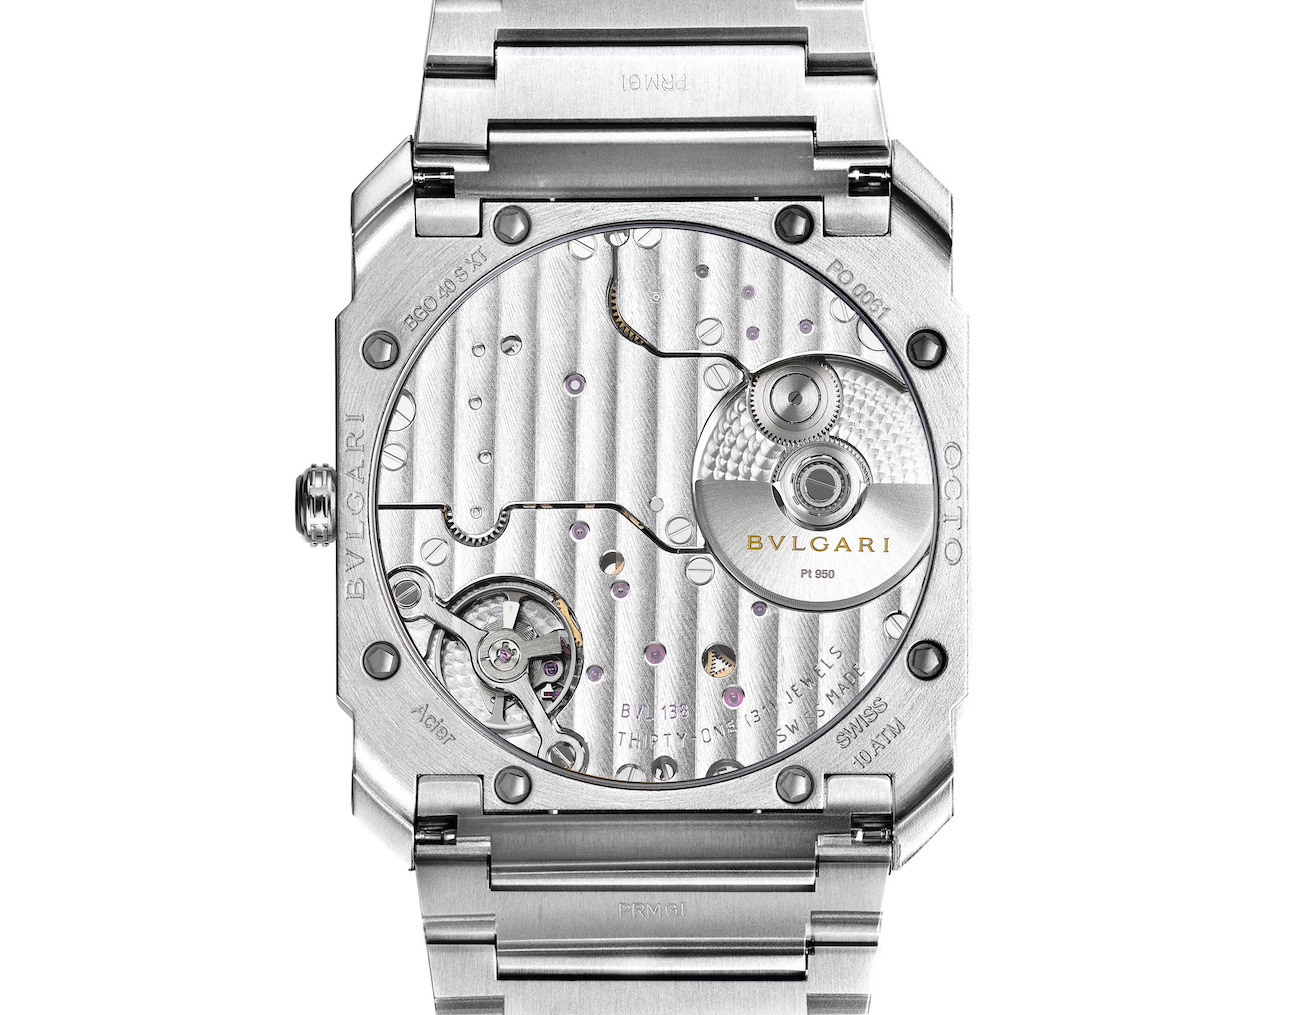 Bulgari presents the Octo Finissimo inspired by Mannerism - Montenapo Daily